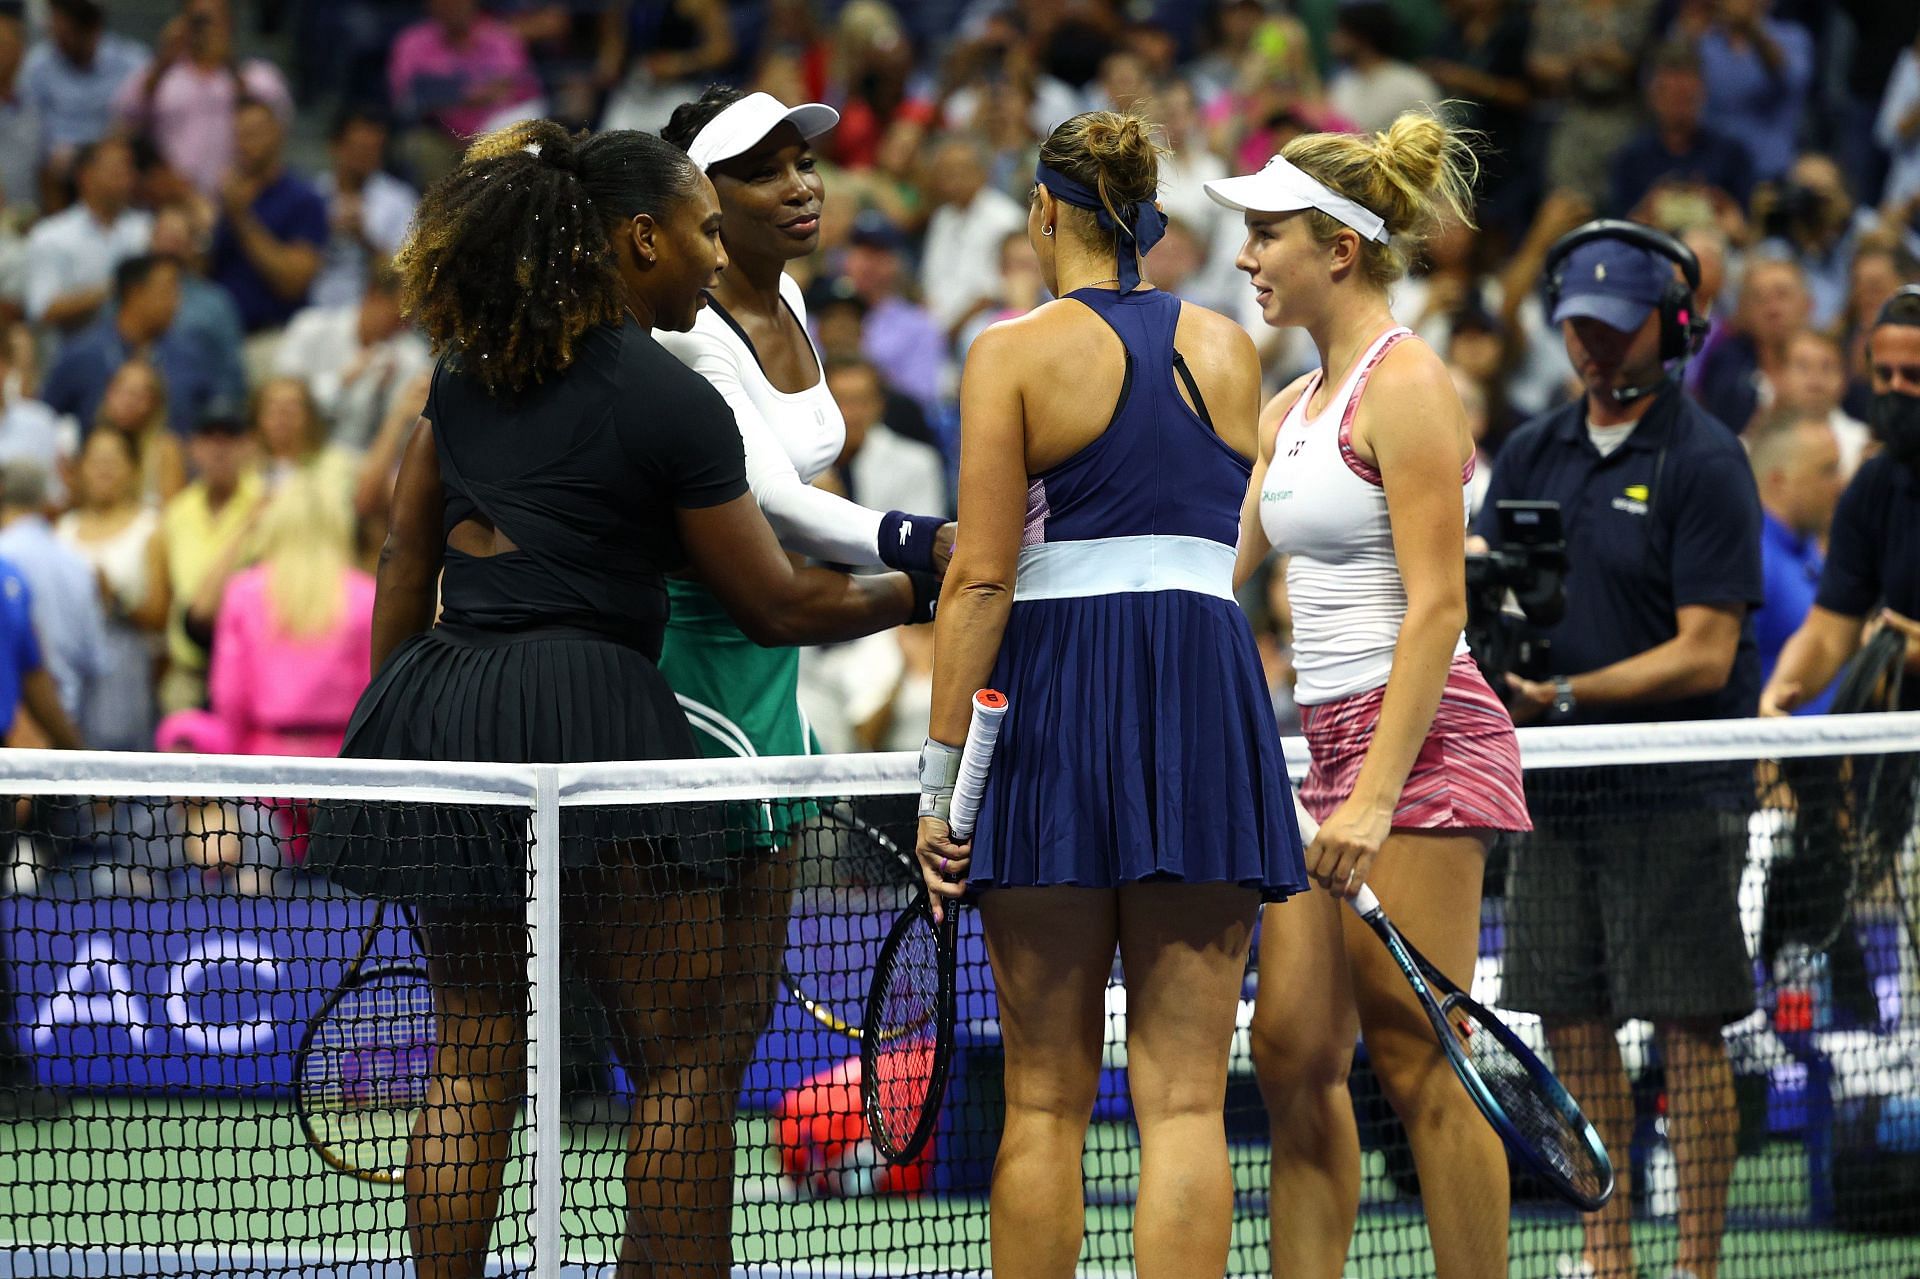 Linda Noskova shaking hands with Serena Williams at the 2022 US Open.